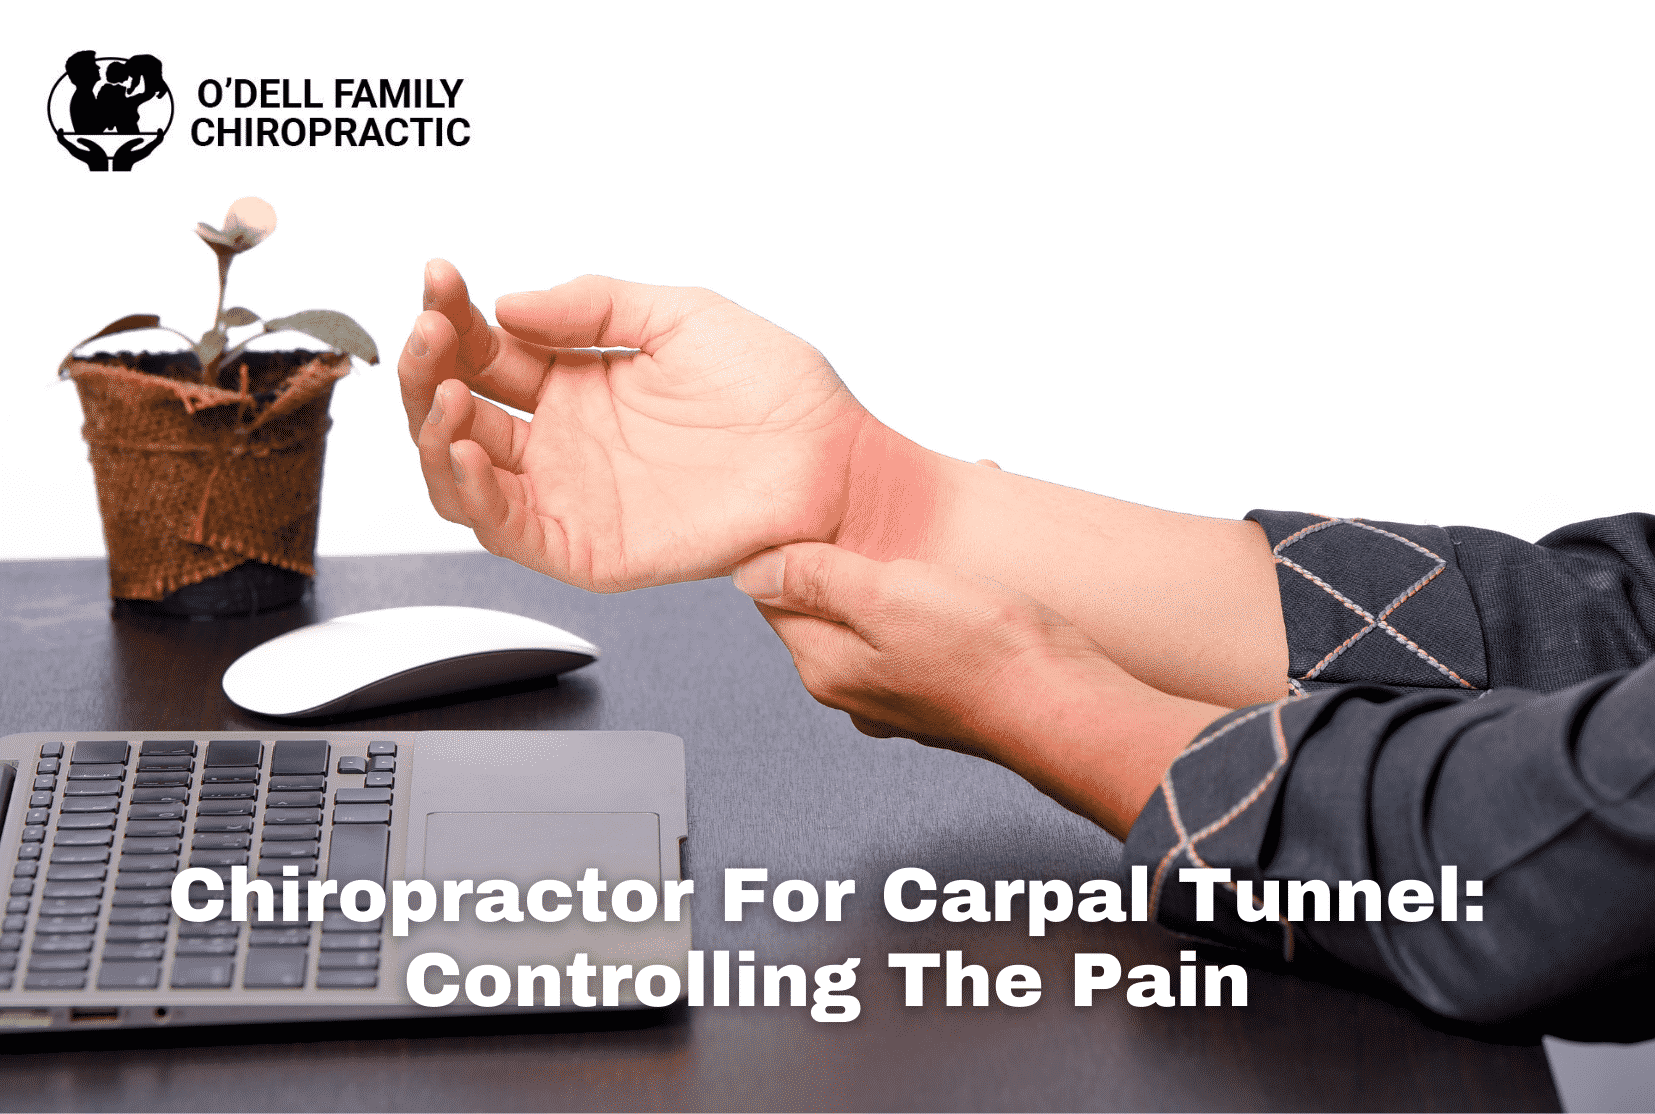 https://odellfamilychiro.com/wp-content/uploads/2021/11/Chiropractor-For-carpal-Tunnel-Norman-ODell.png